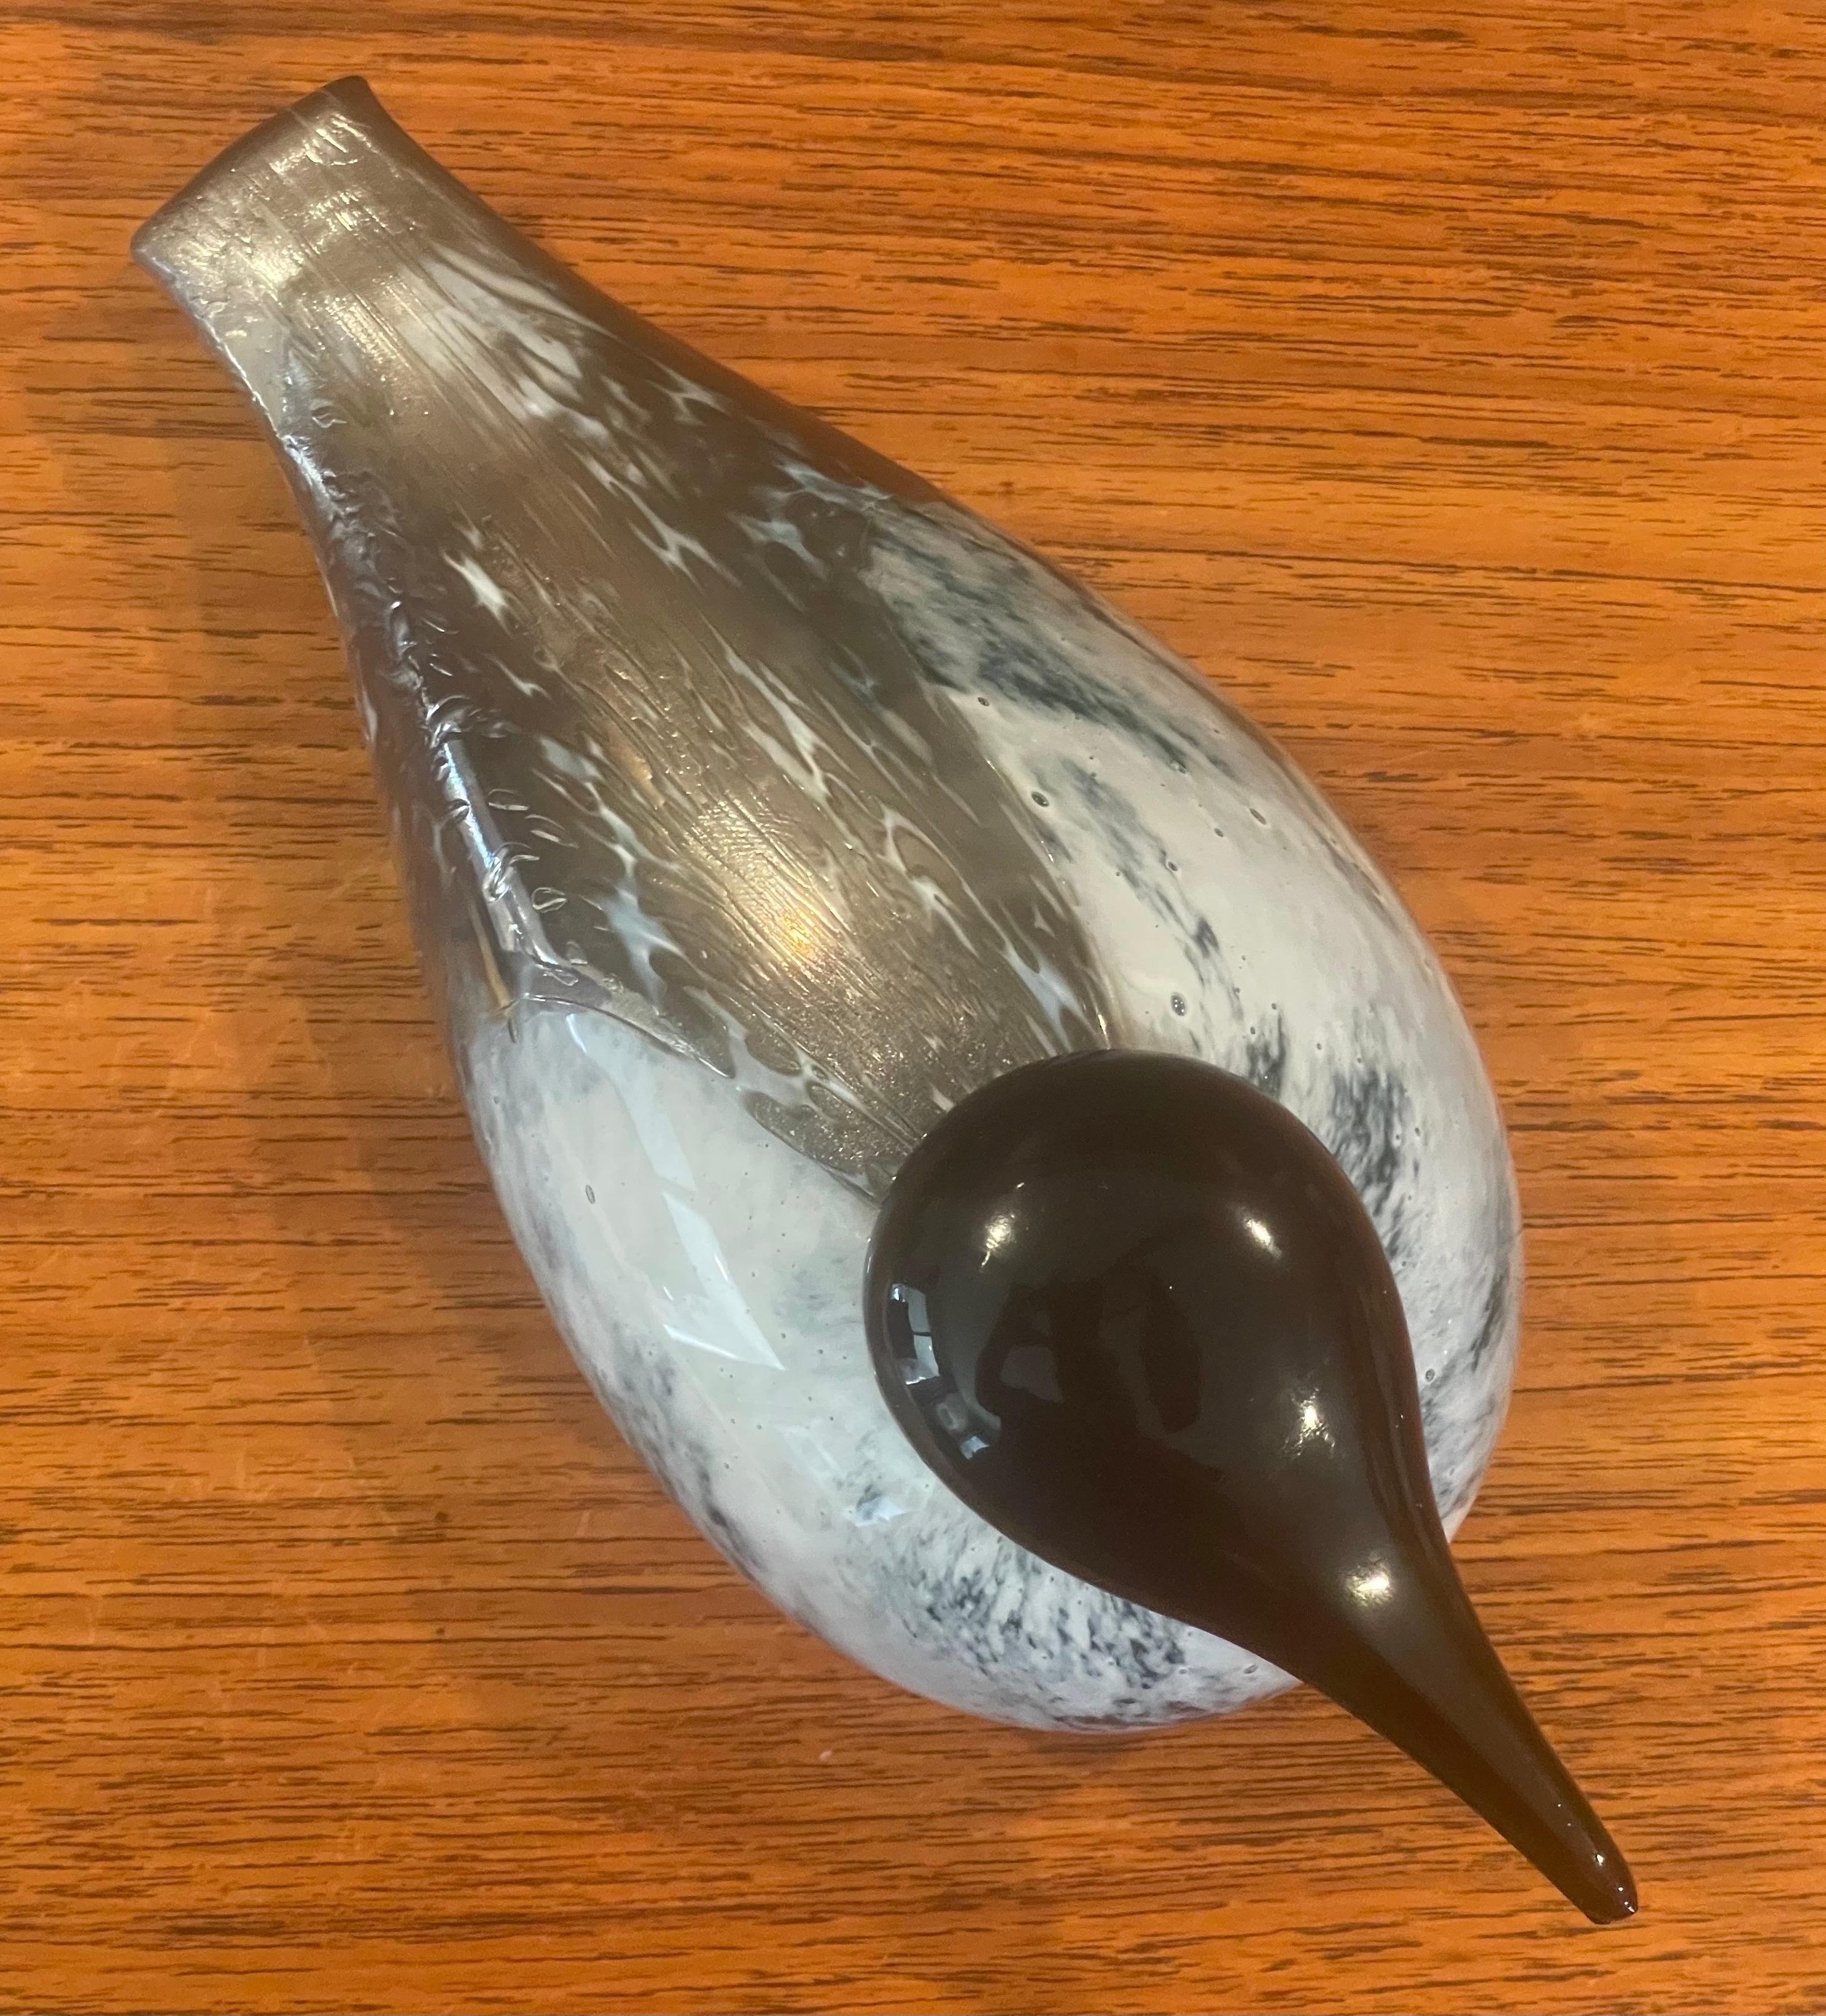 20th Century Limited Edition Art Glass Bird Sculpture by Oiva Toikka / Nuutajarvi of Finland For Sale